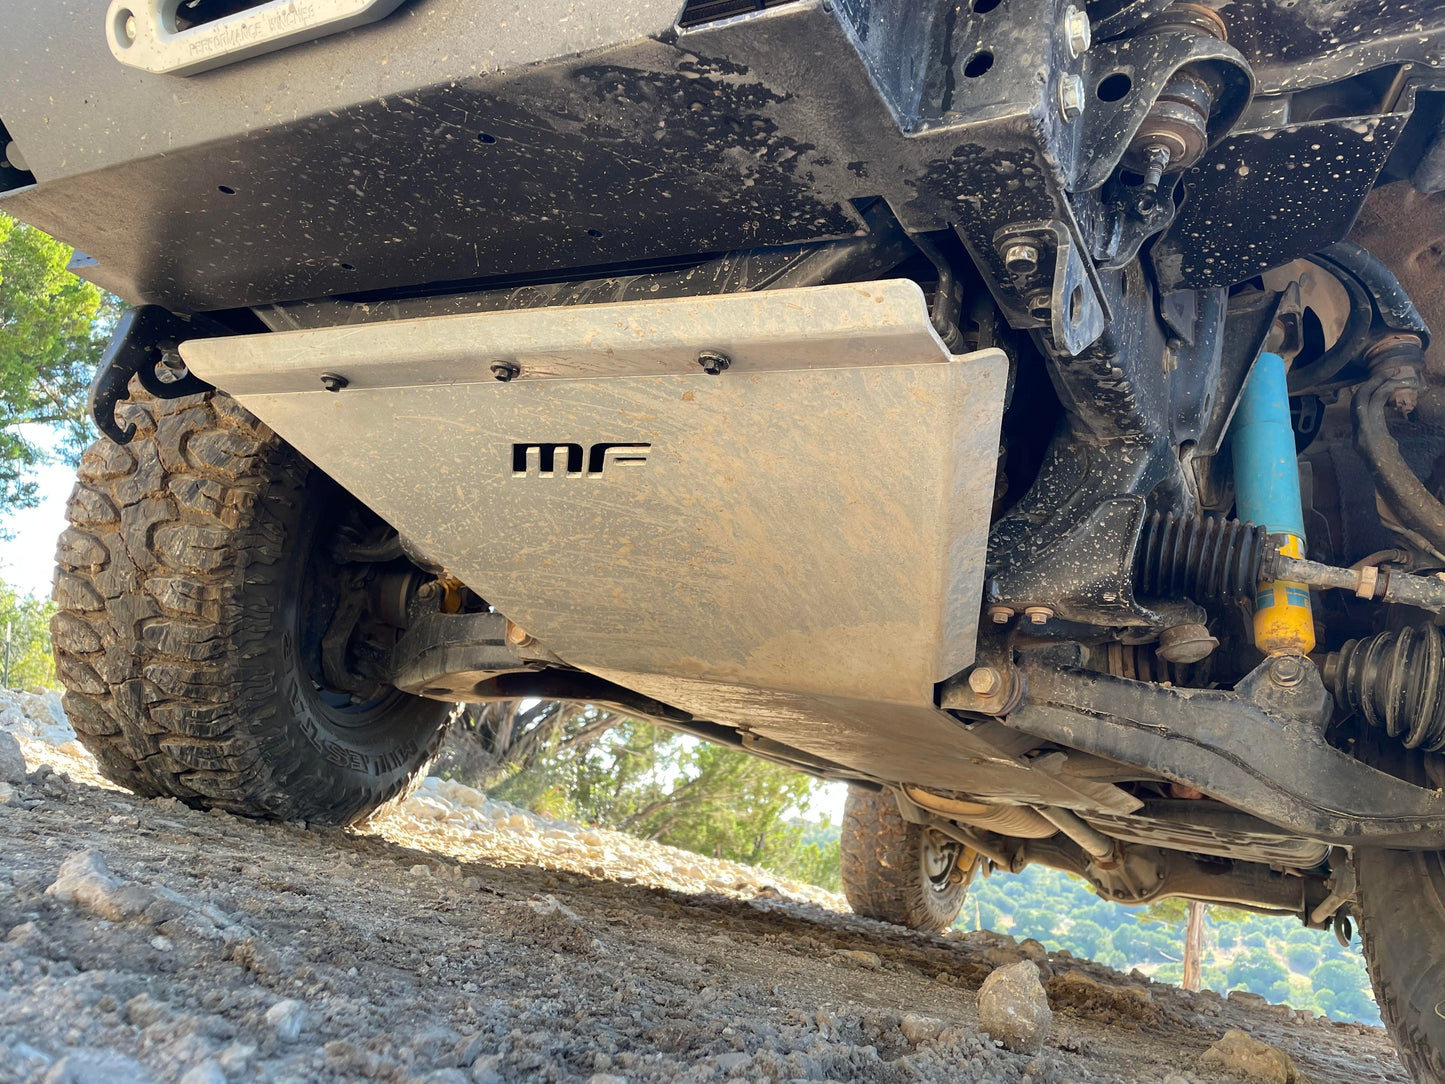 100 series/LX470 front and mid skid plates